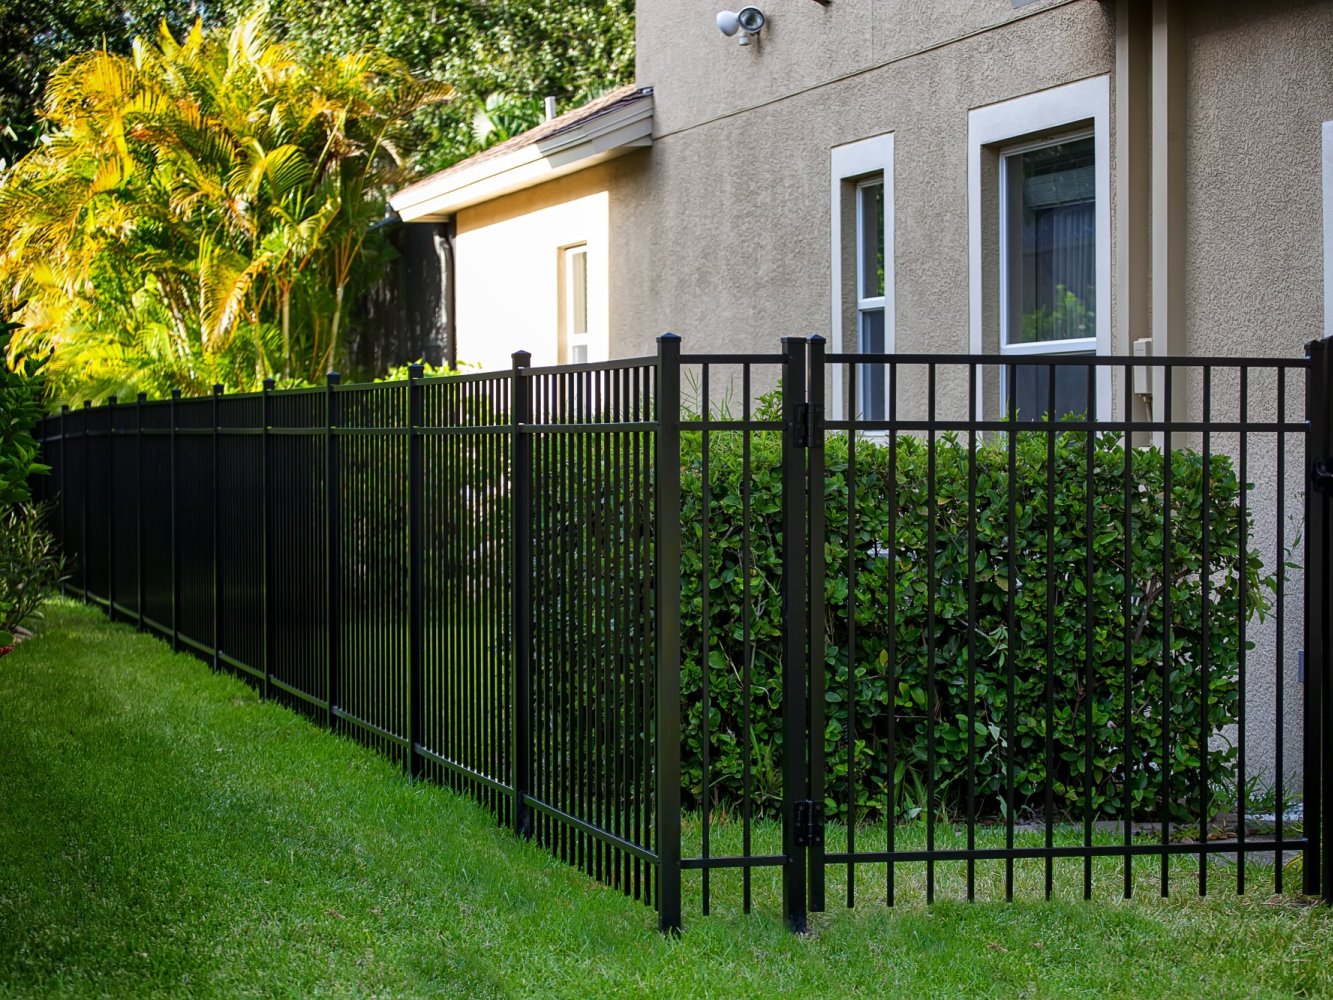 Balch Springs Texas residential fencing company